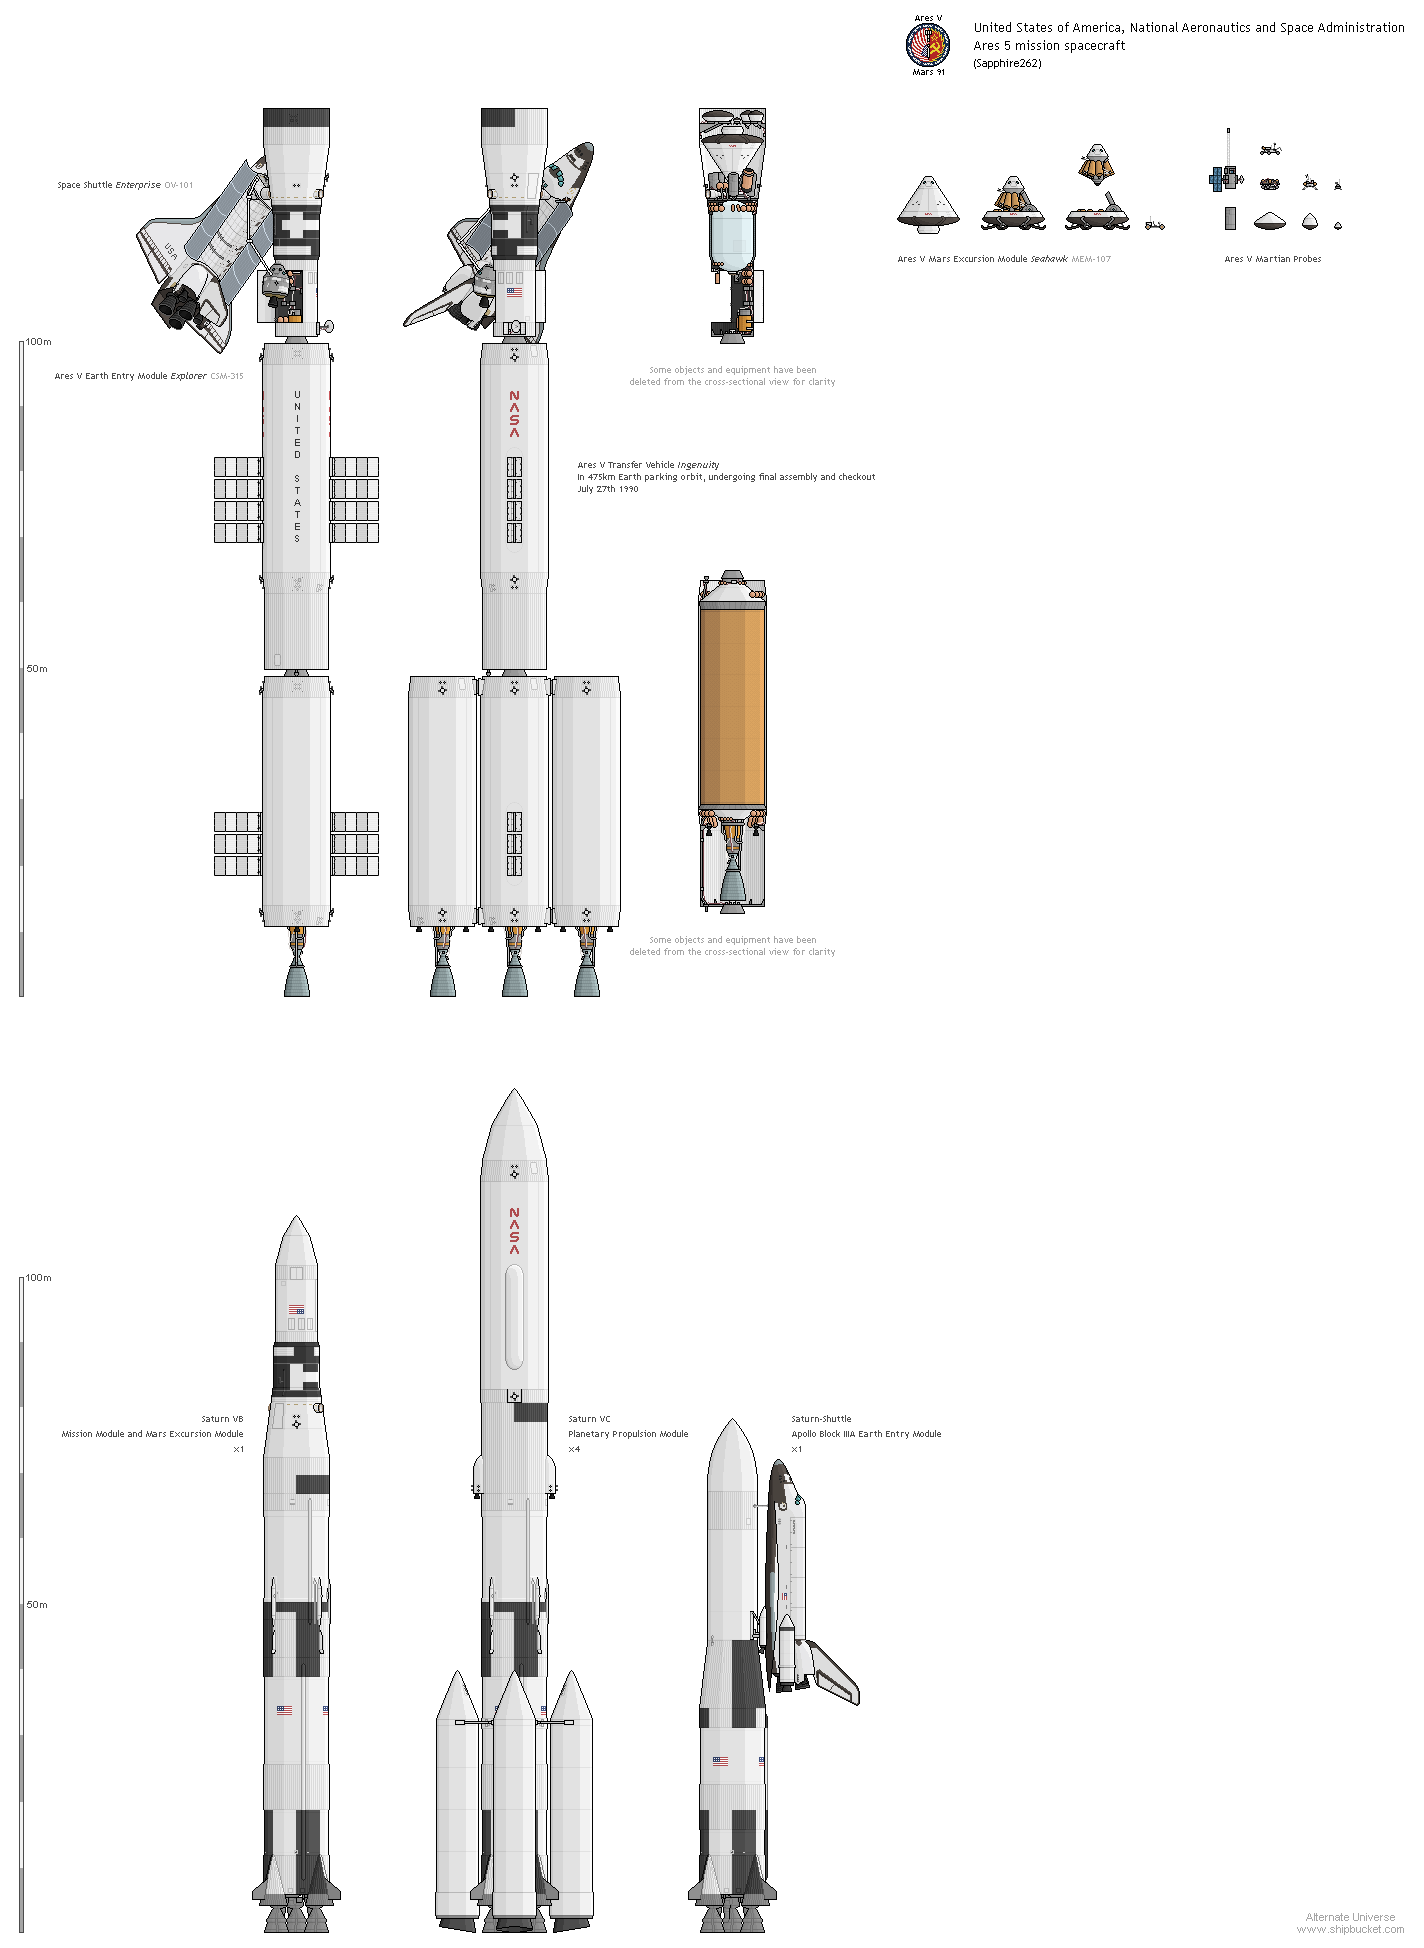 Ares 5 Mission Spacecraft (Sapphire262).png